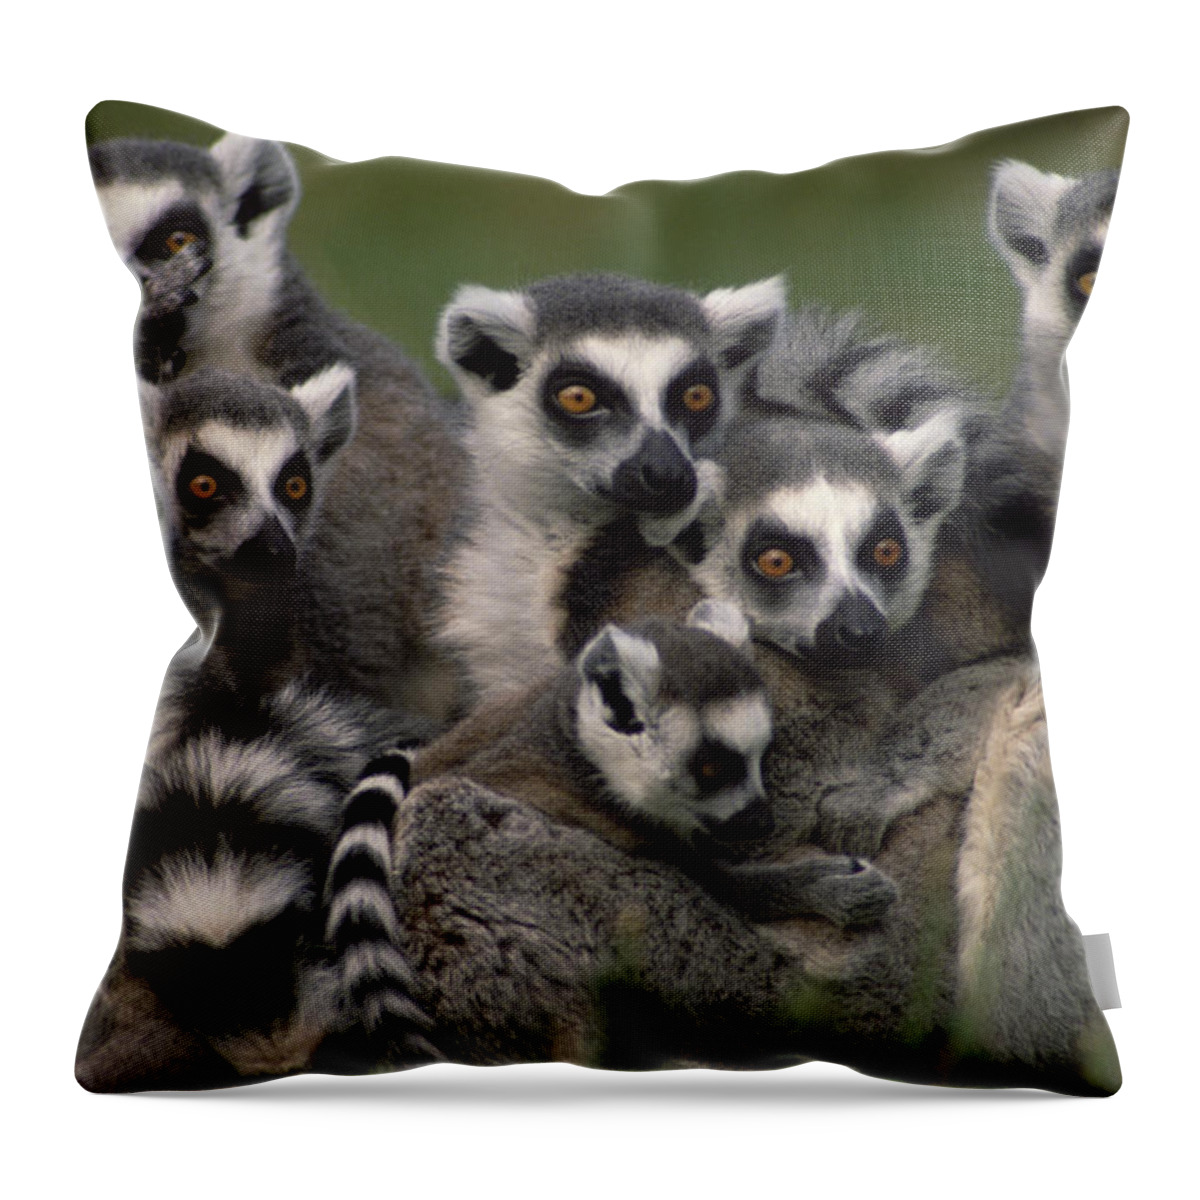 Mp Throw Pillow featuring the photograph Ring-tailed Lemur Lemur Catta Group by Gerry Ellis